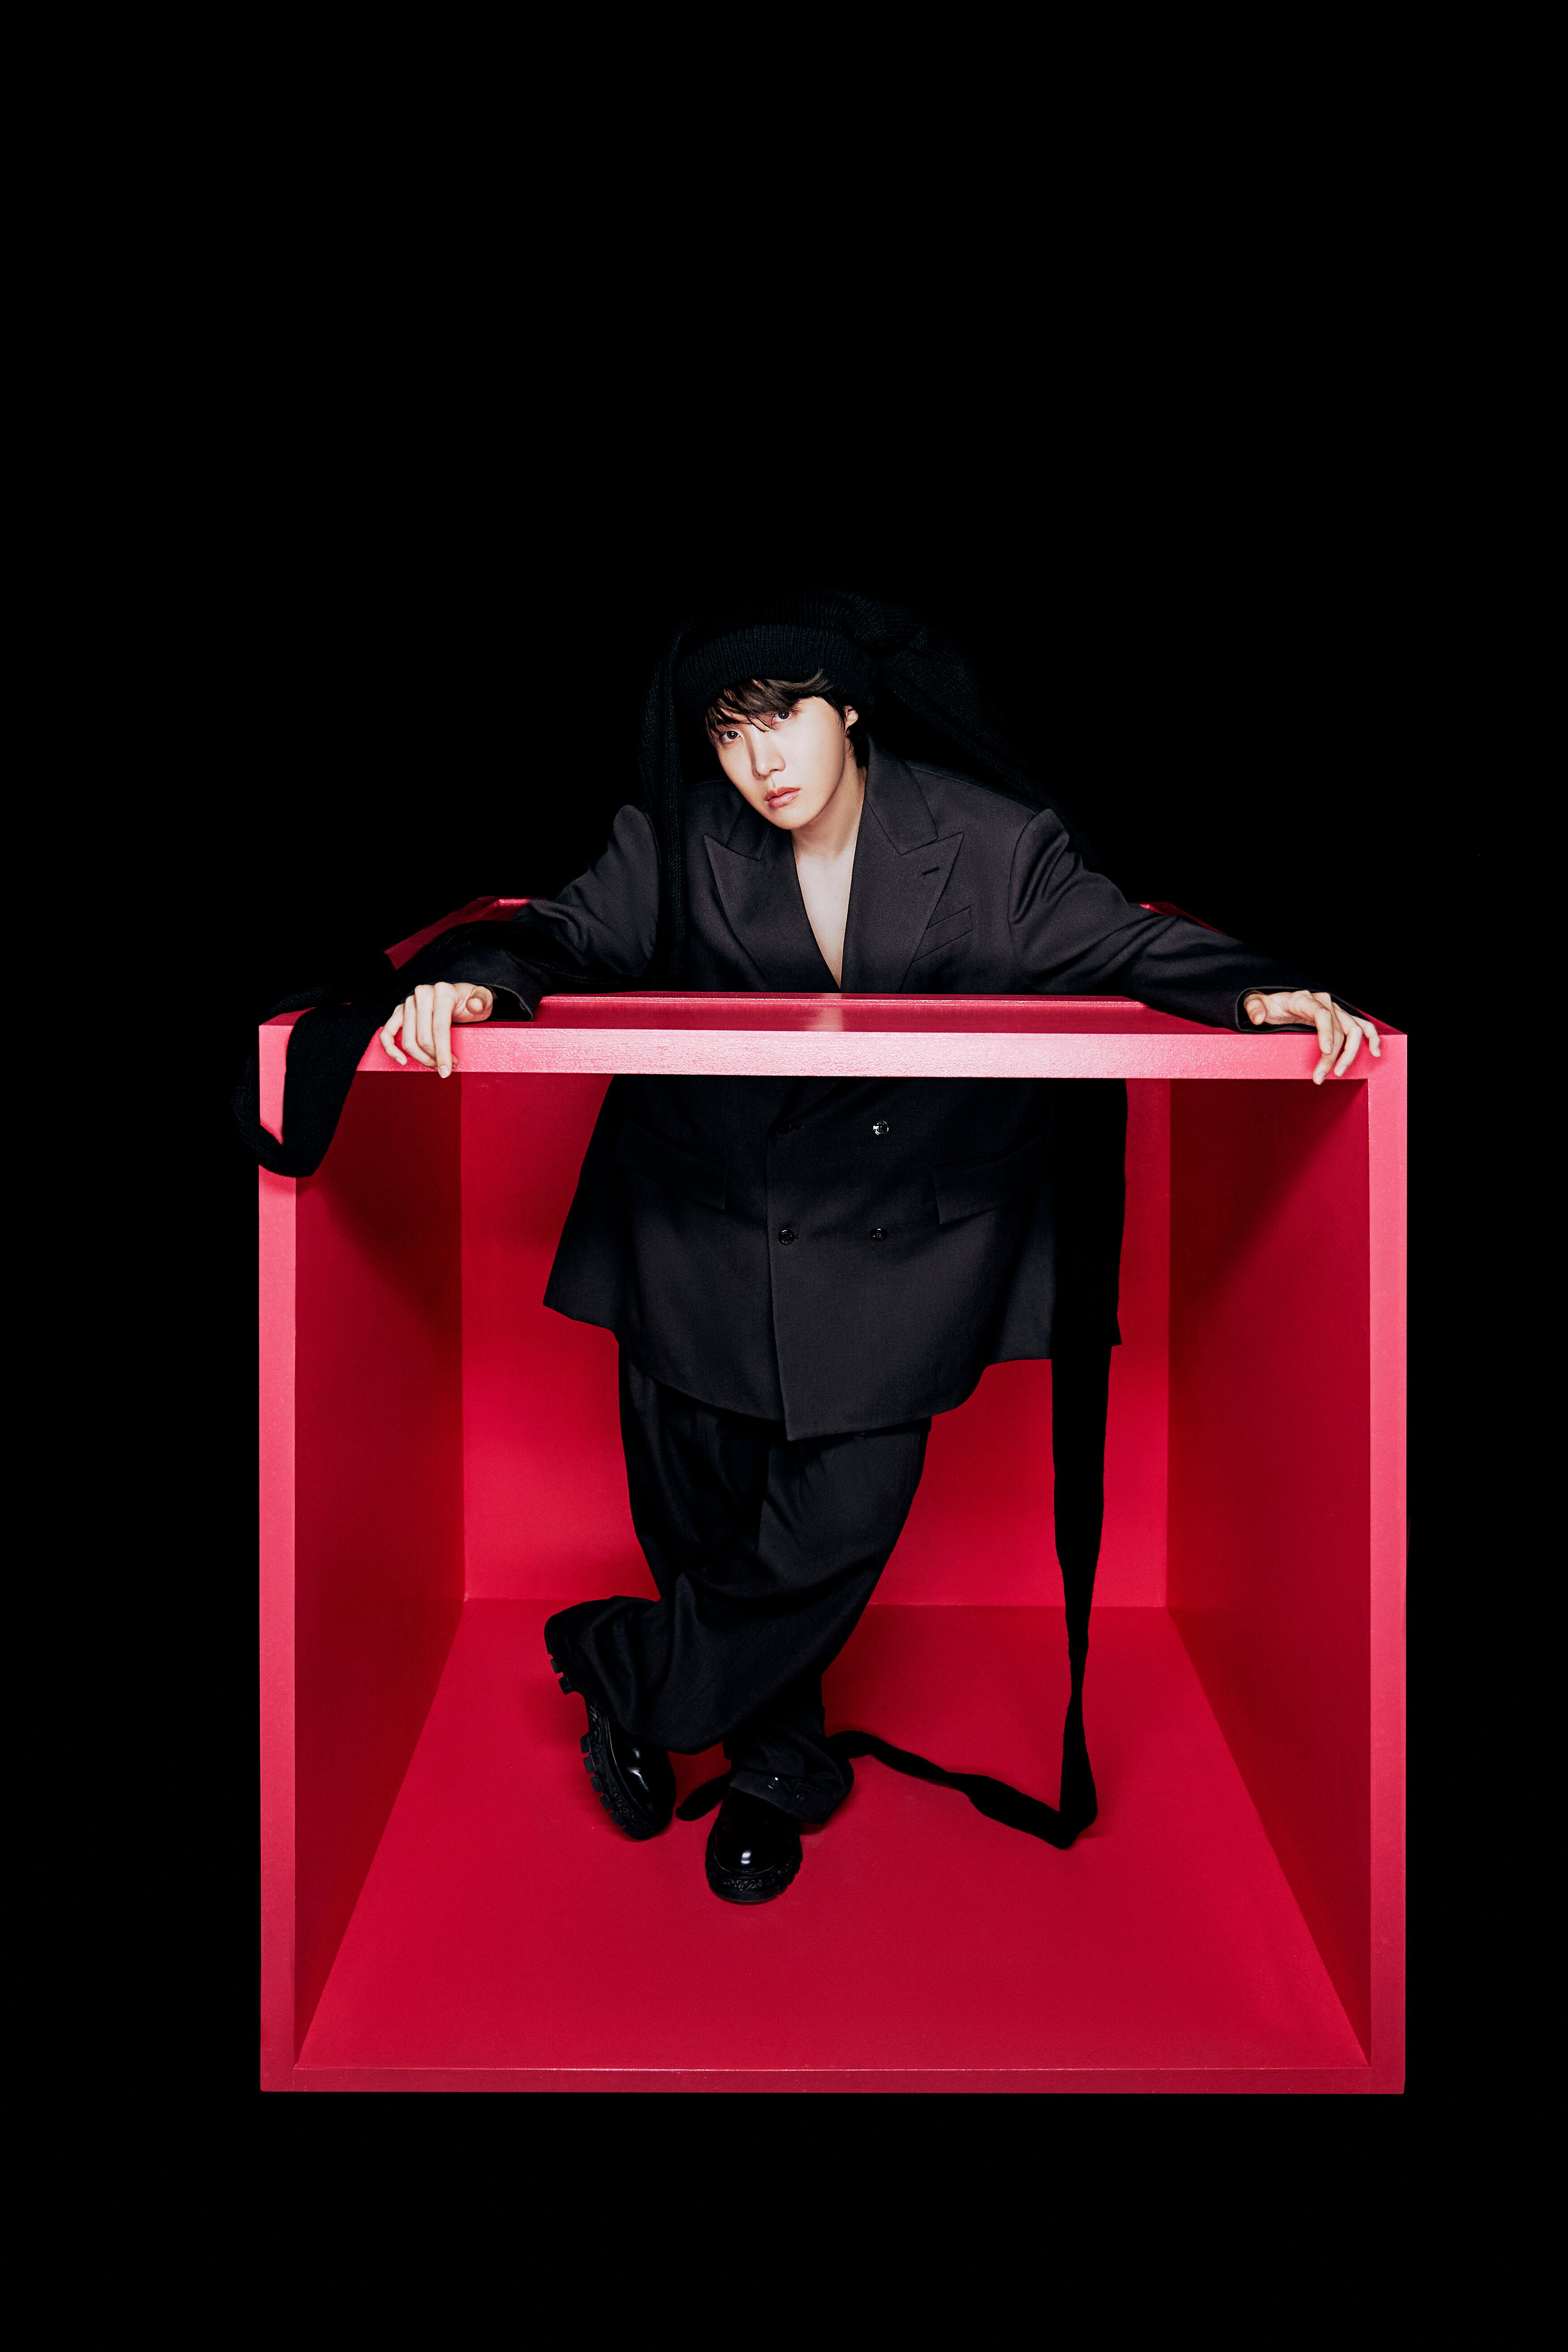 j-hope - “Jack In The Box” (HOPE Edition) Concept Photo